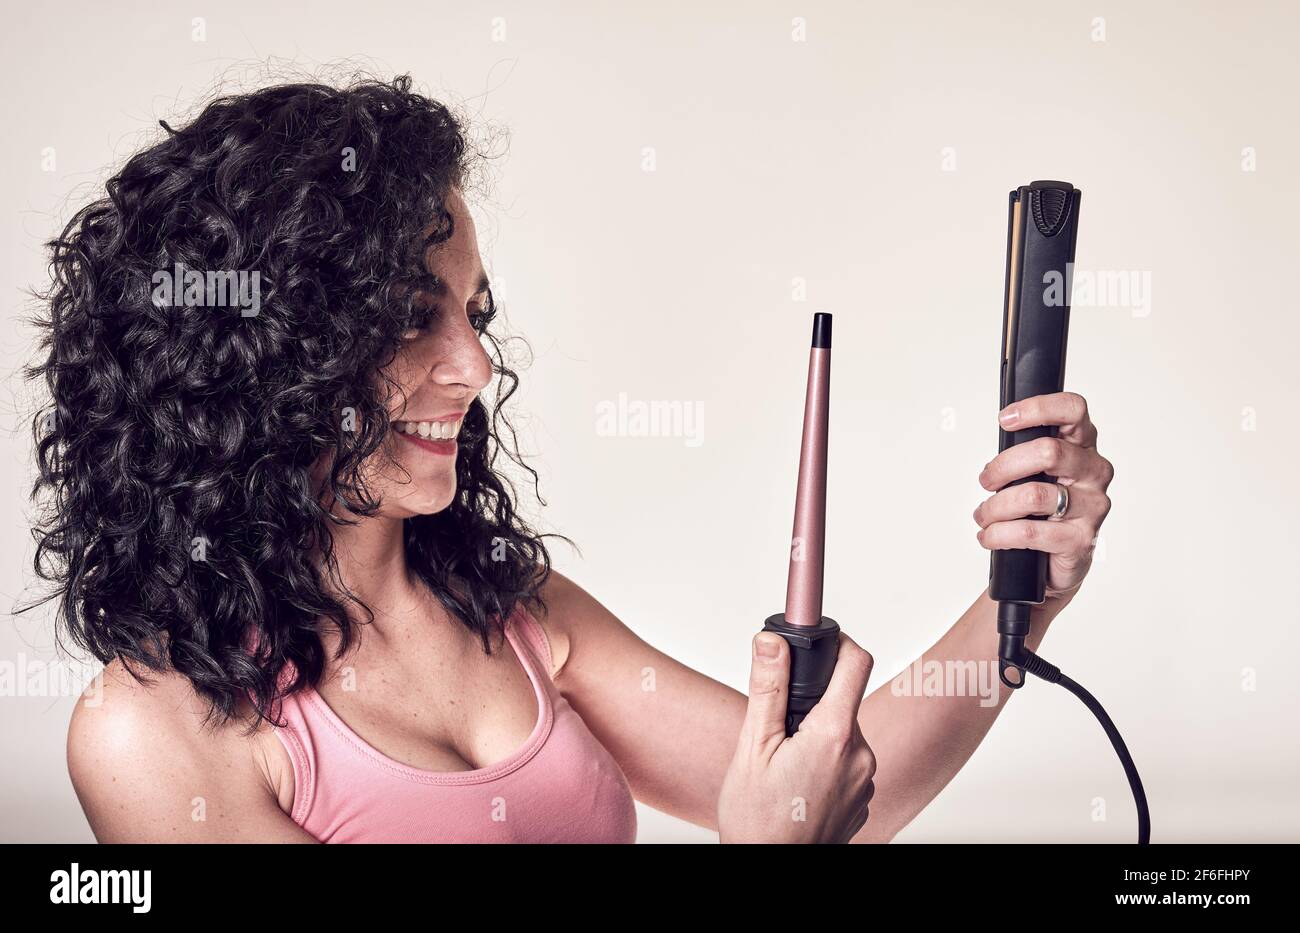 Young smiling curly-haired woman in profile holds a hair curler and a hair straightener. care and beauty concept Stock Photo